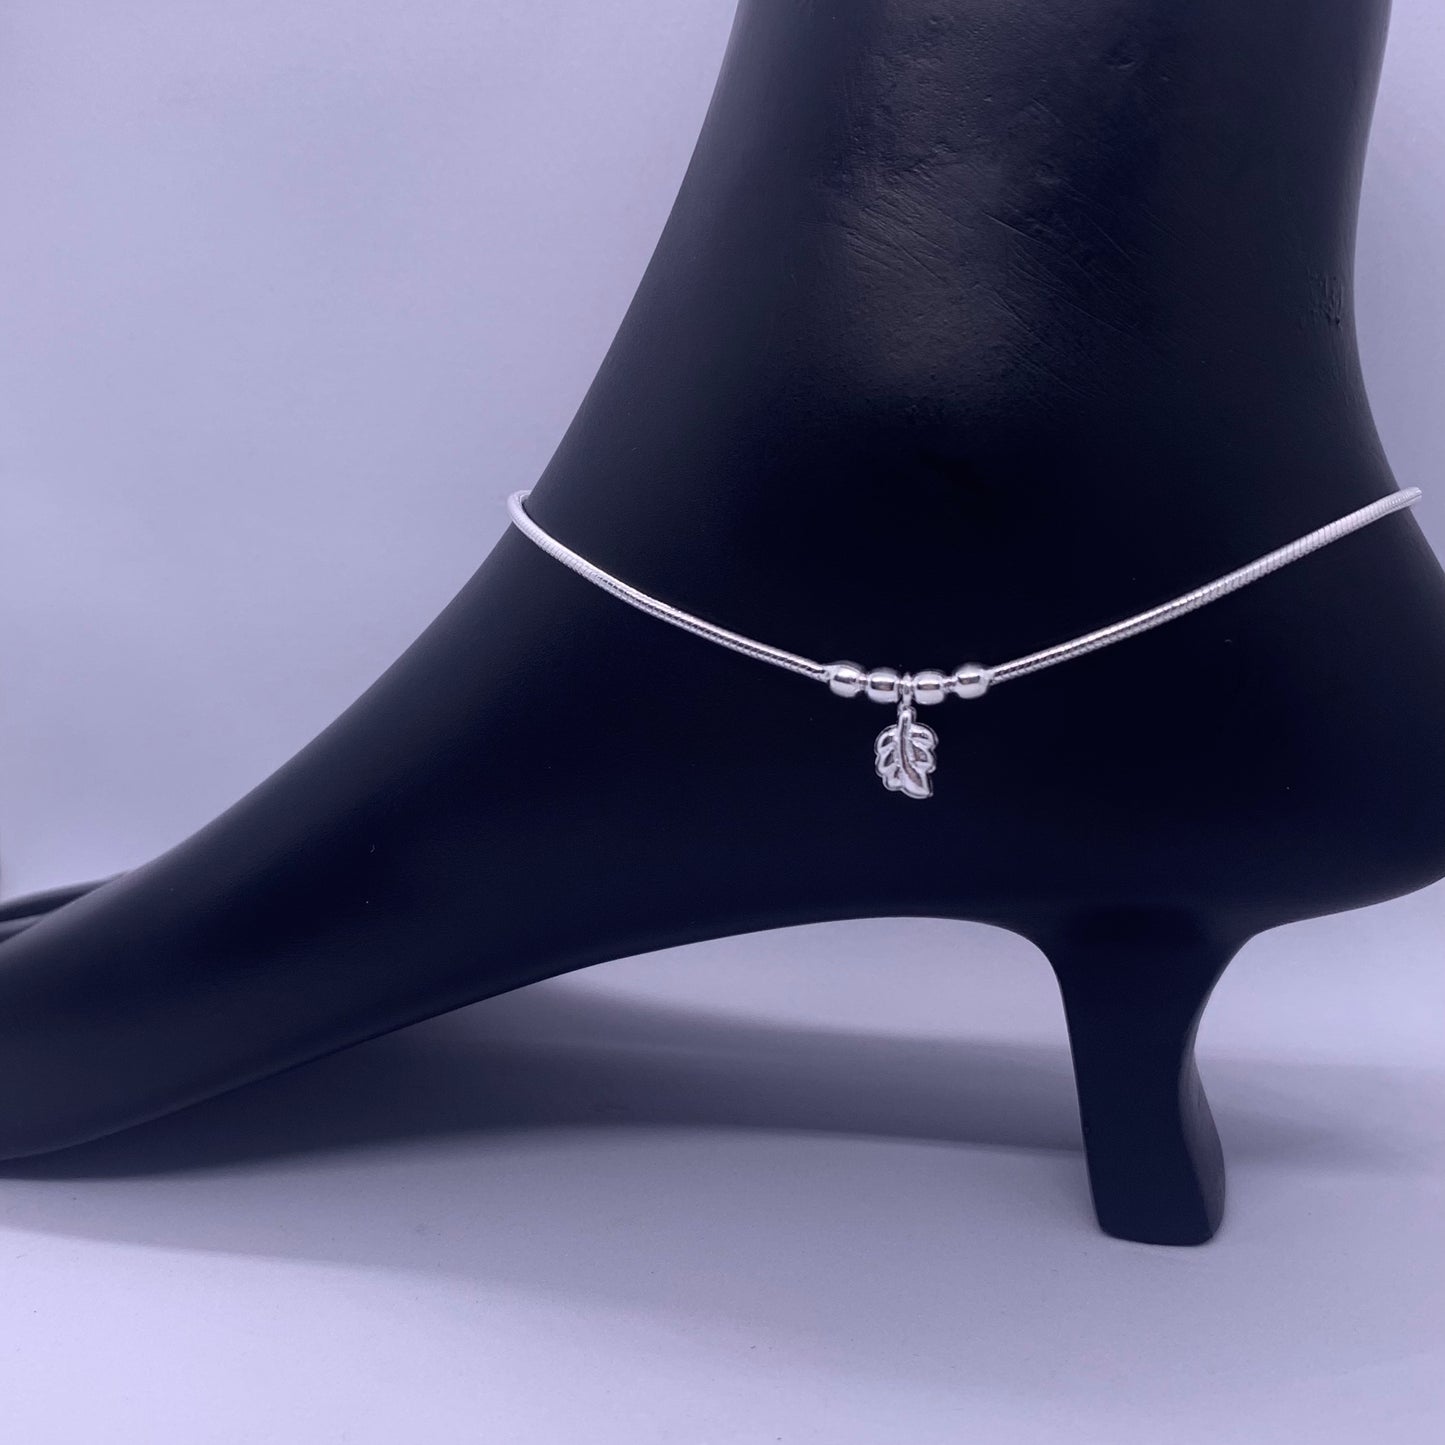 Pure Silver Leafs Anklet - Silver Jewelery 925